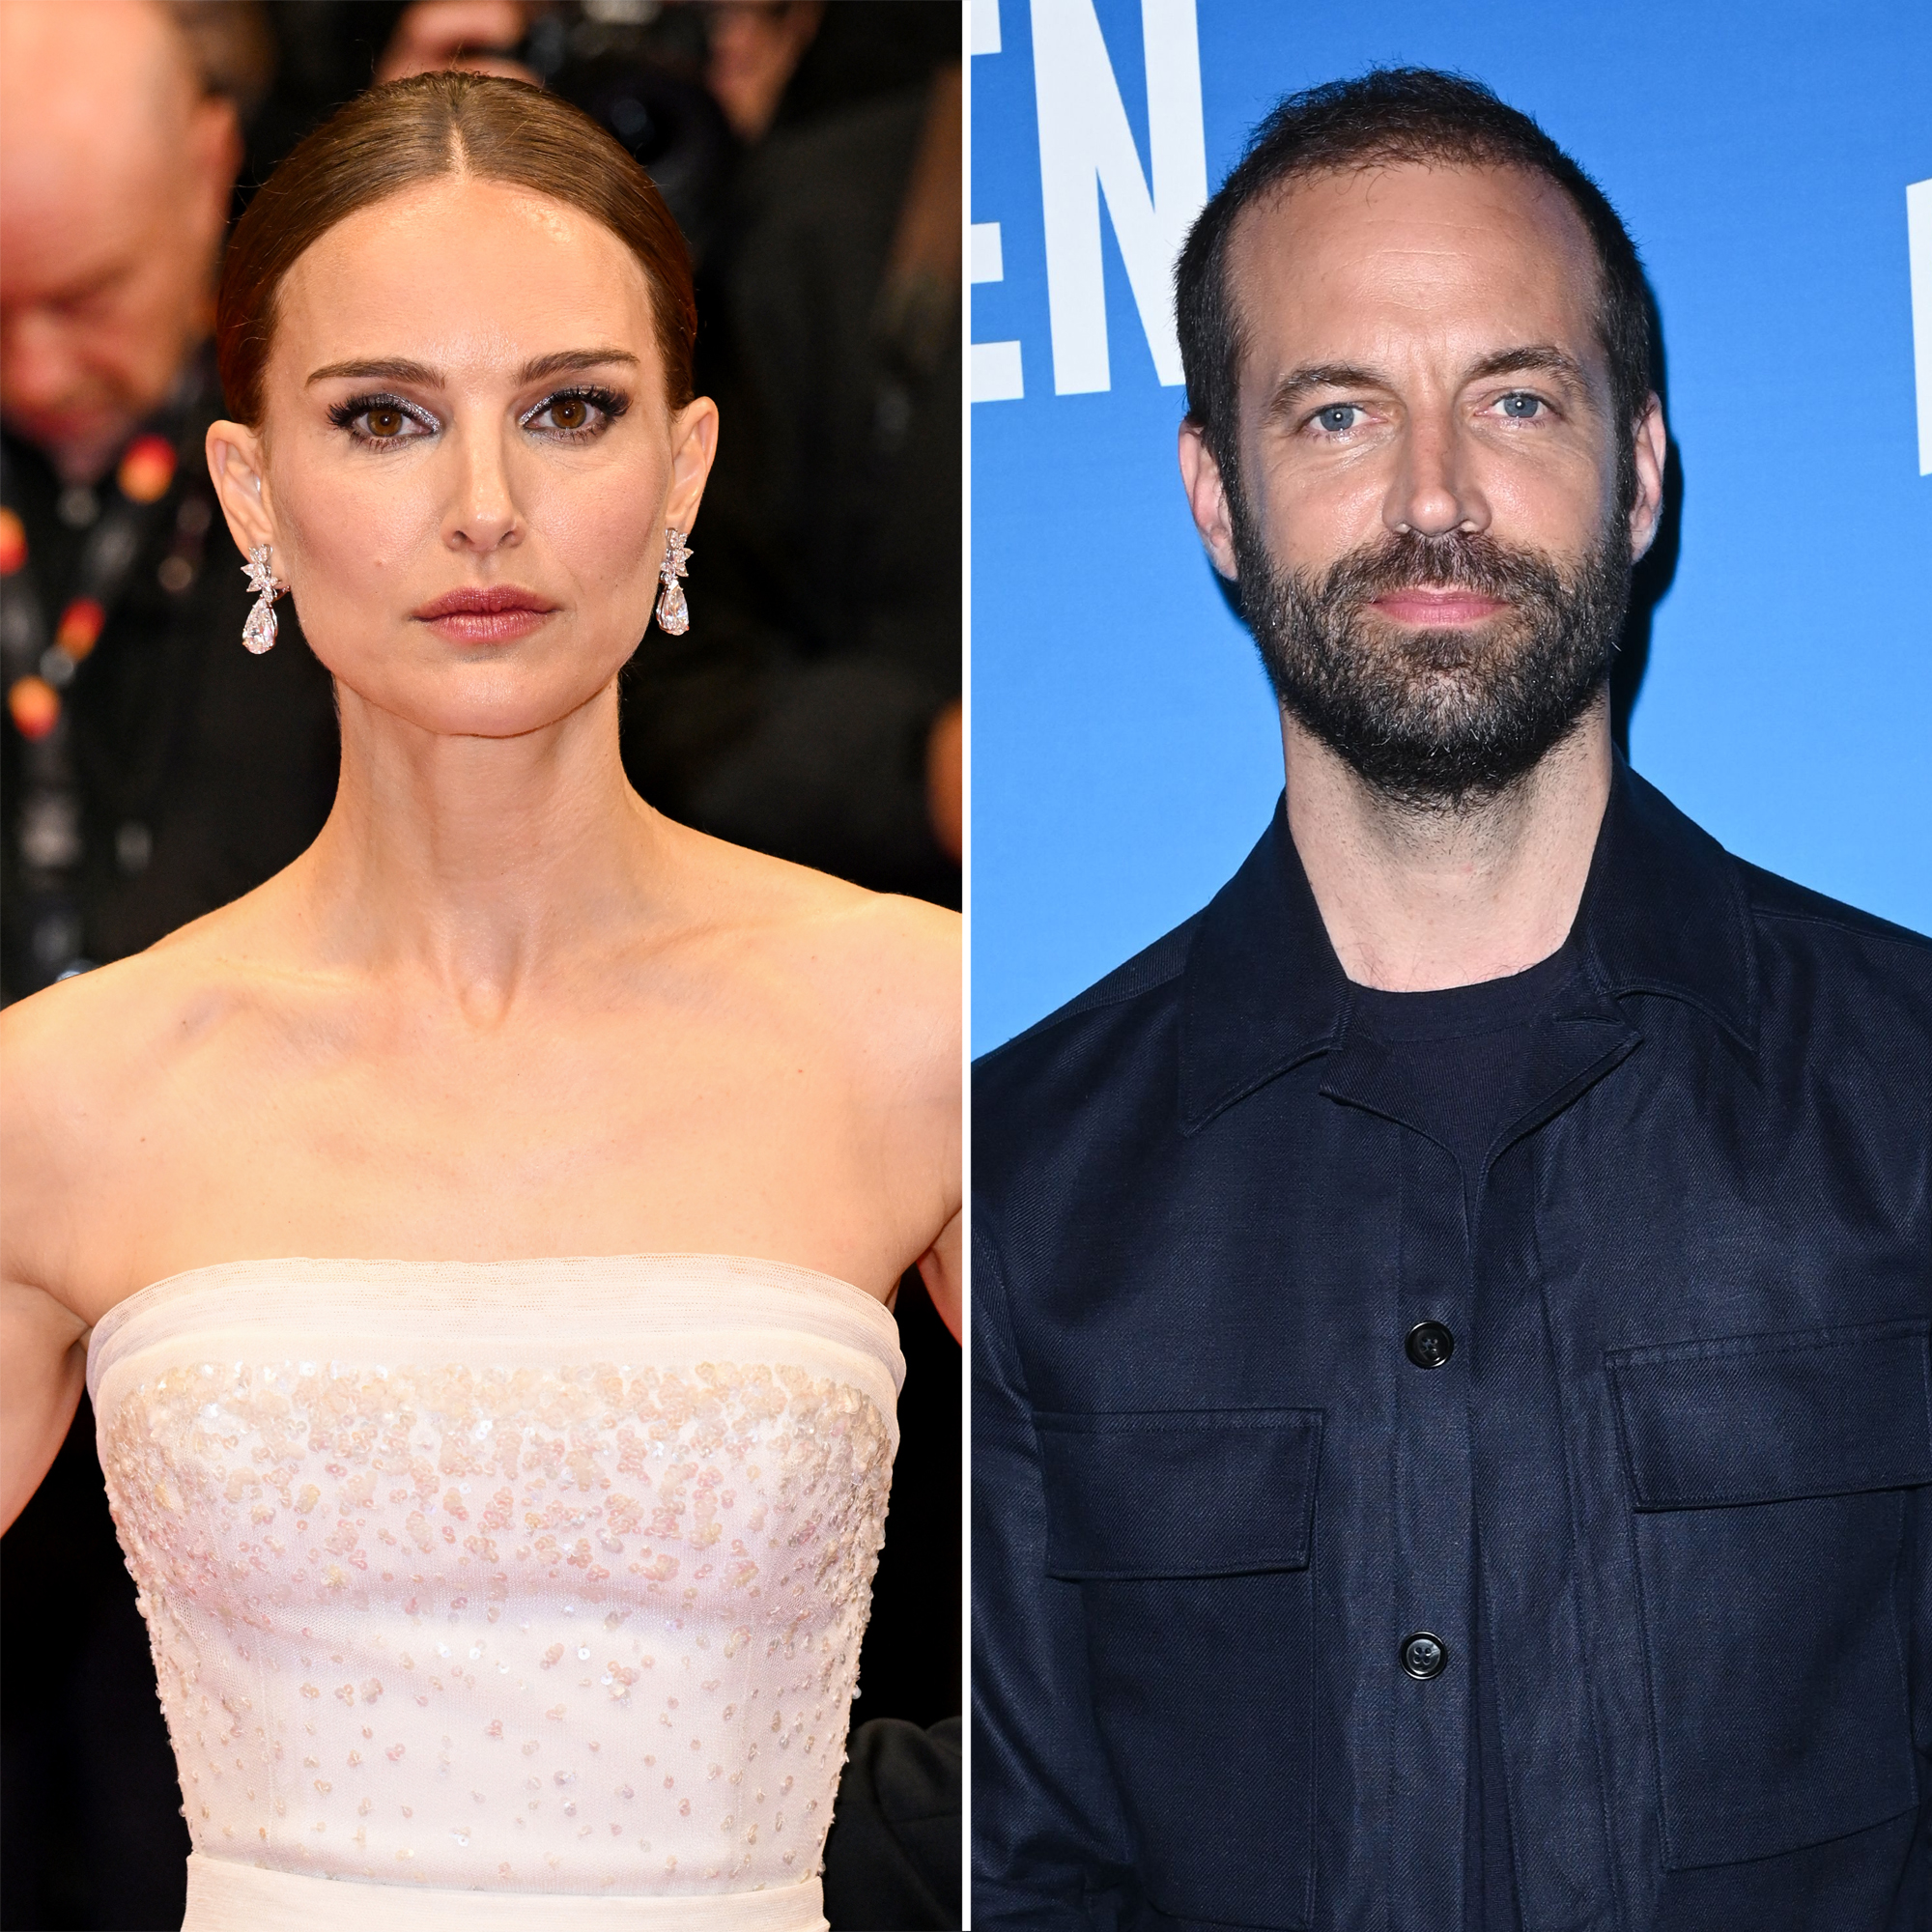 Natalie Portman and Benjamin Millepied Are Separated After Affair image image image